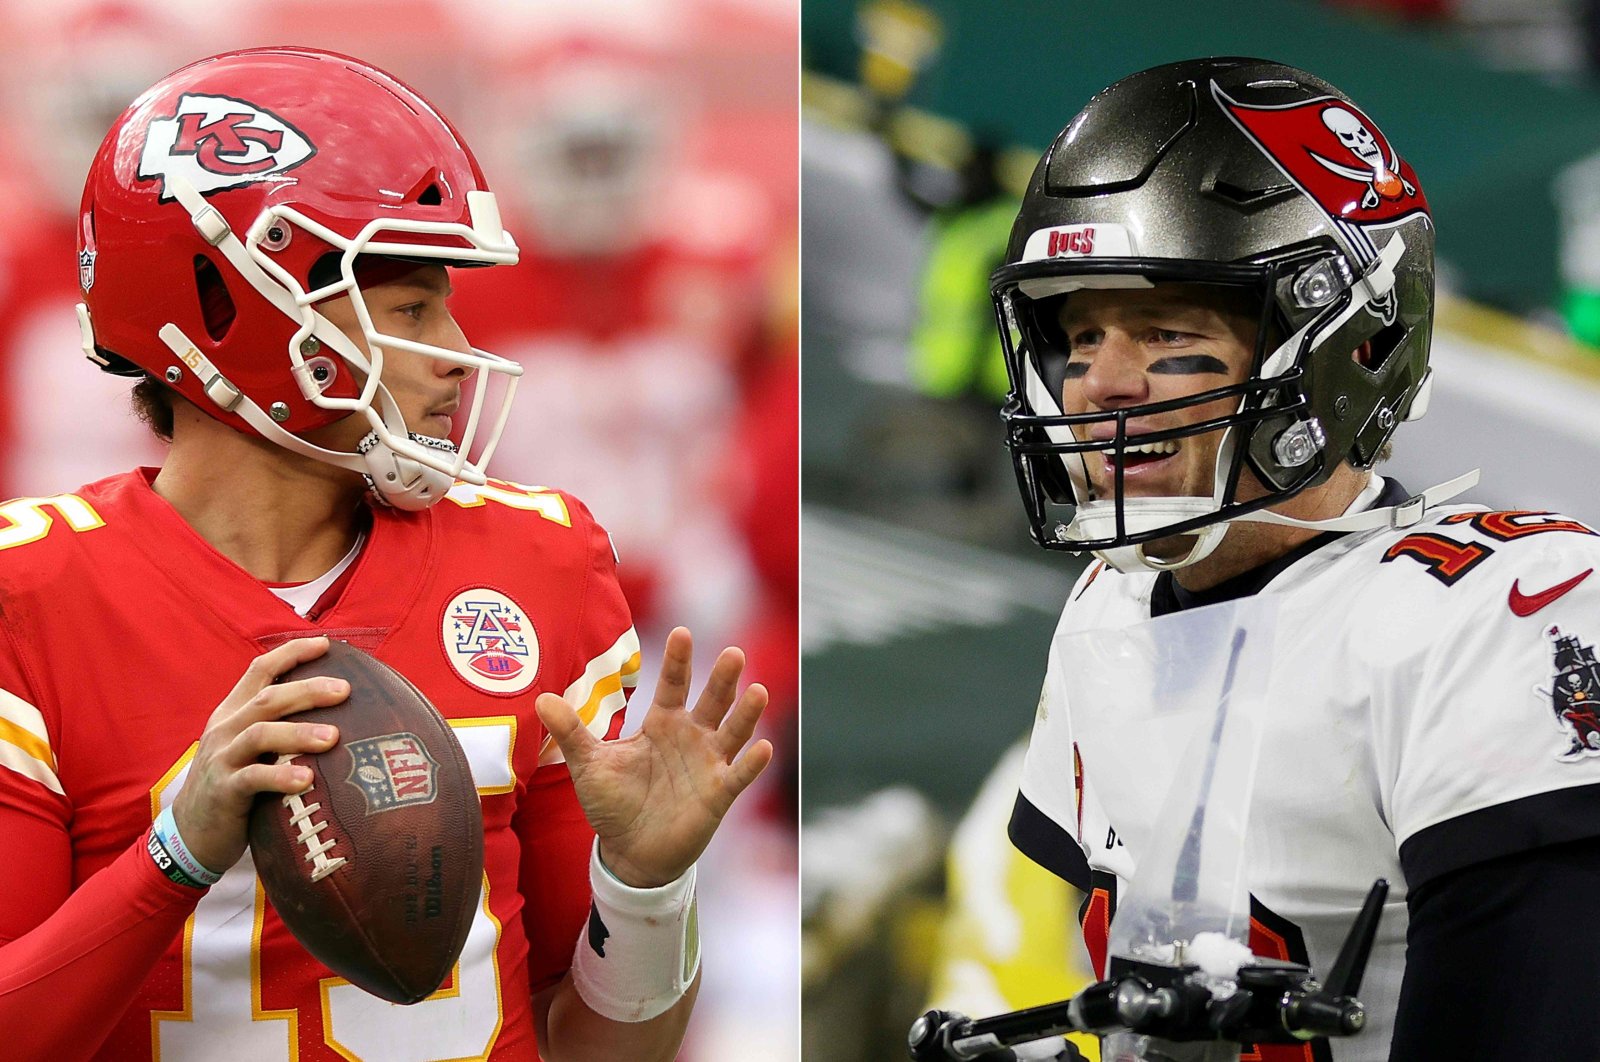 Photo combination of Kansas City Chiefs' quarterback Patrick Mahomes (L) and Tampa Bay Buccaneers' quarterback Tom Brady. (AFP Photo) 
The duo guided their respective teams to the Super Bowl 55 scheduled for Feb. 8, 2021.